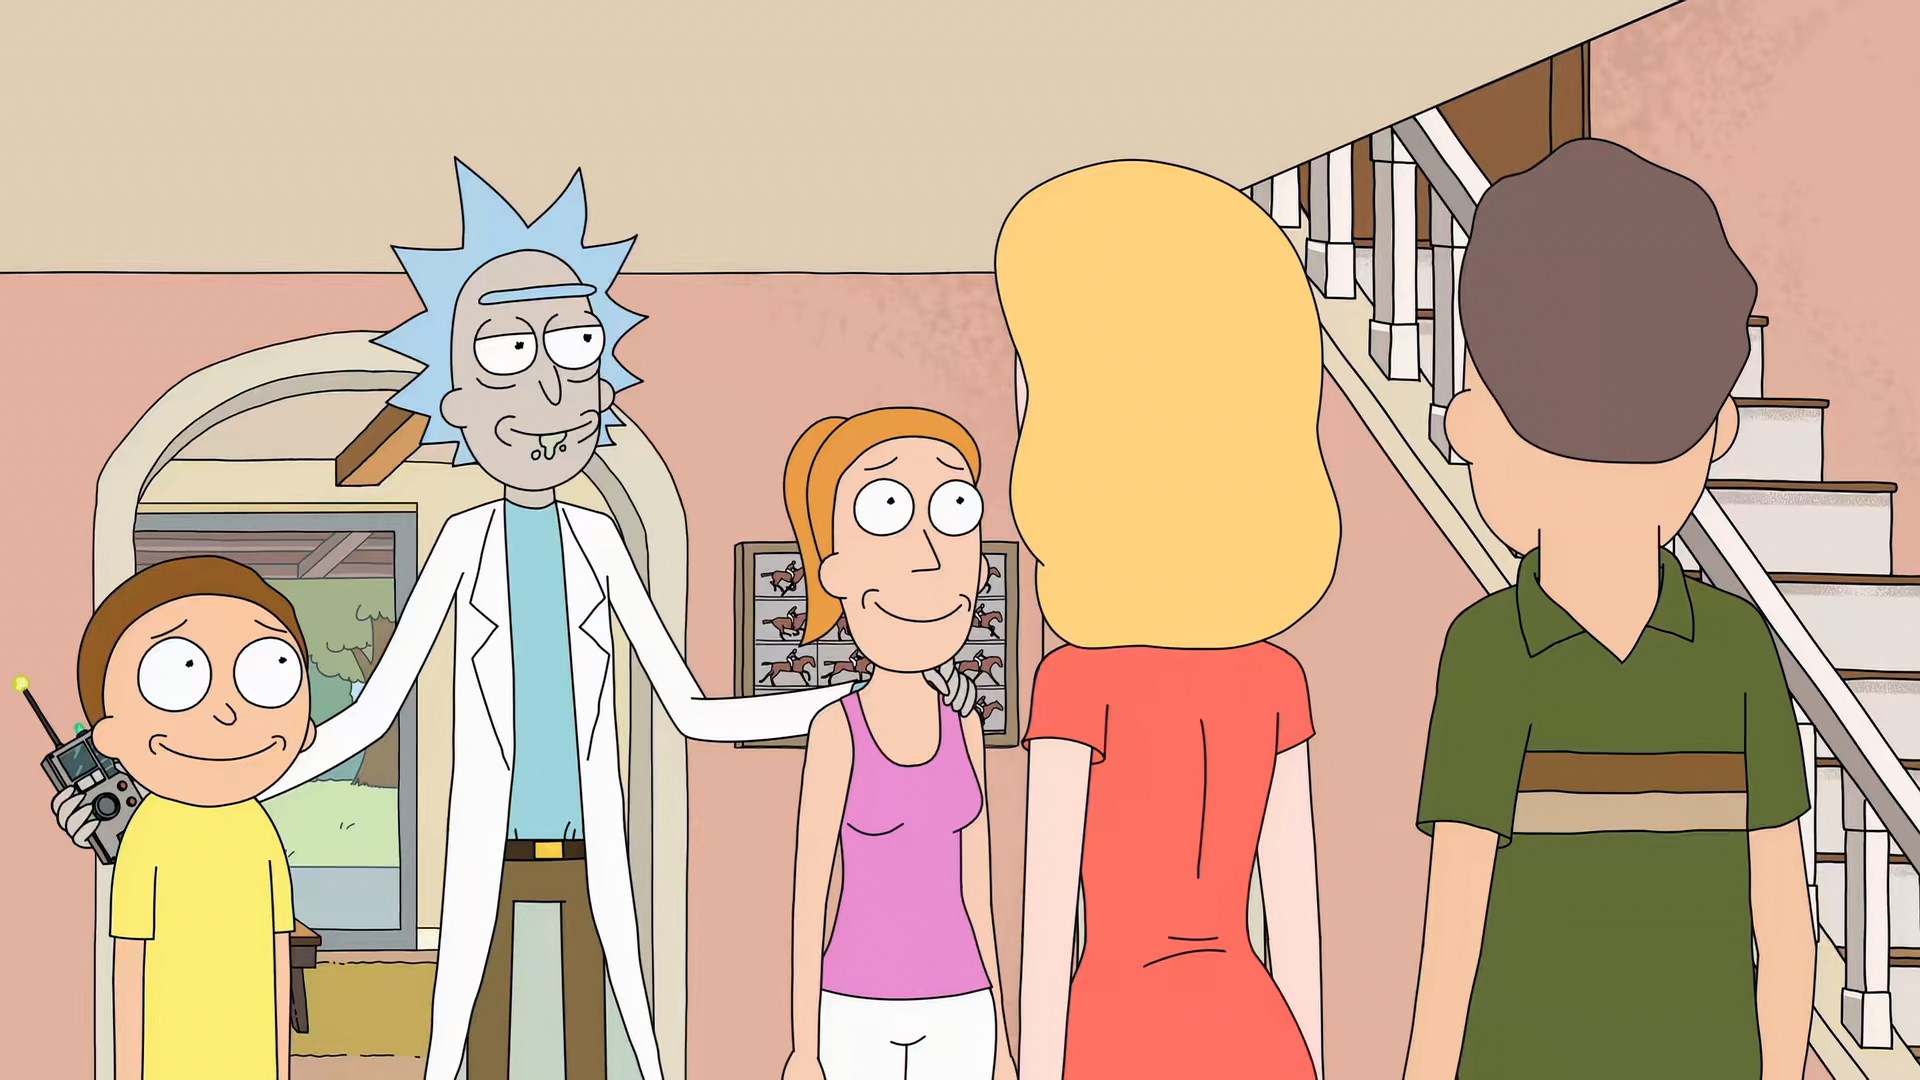 Rick and Morty S02E01 A Rickle in Time [1080p x265 10bit Joy].mkv snapshot 01.30.465